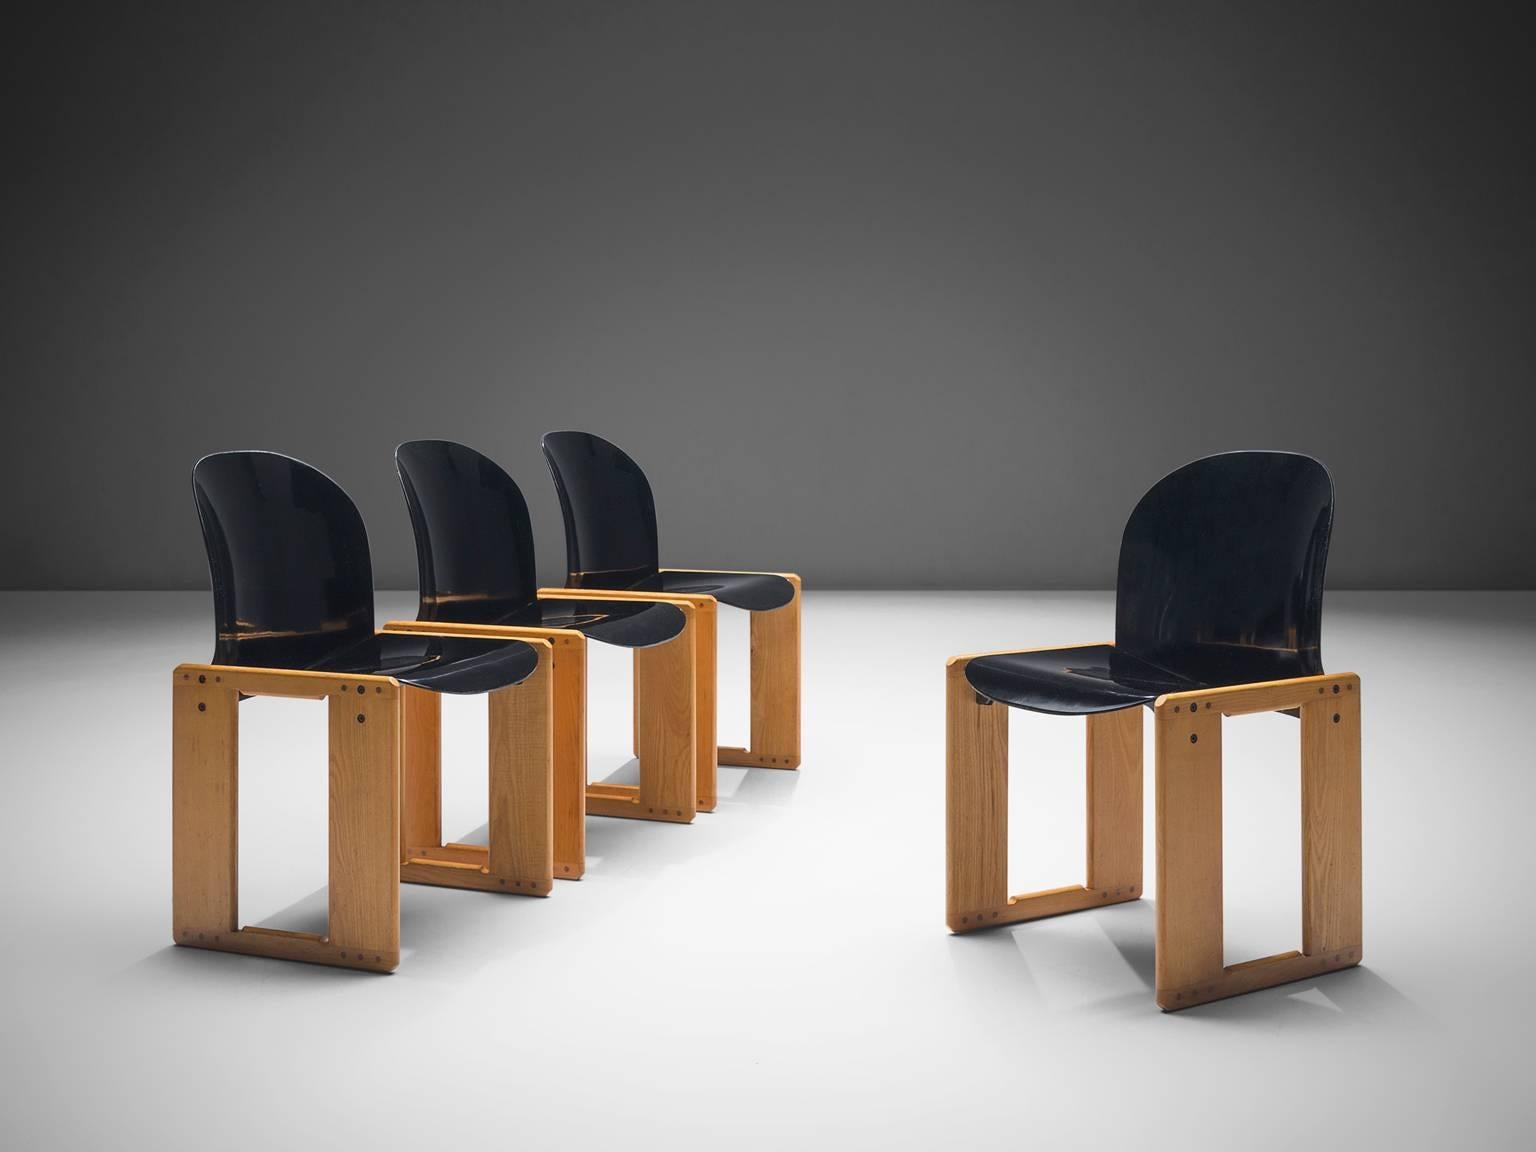 Afra & Tobia Scarpa for Cassina, set of four chairs model 121, wood and walnut, Italy, 1965.

Set of four chairs by Italian designer couple Tobia and Afra Scarpa. These chairs have a cubic and architectural appearance. The base consist of four